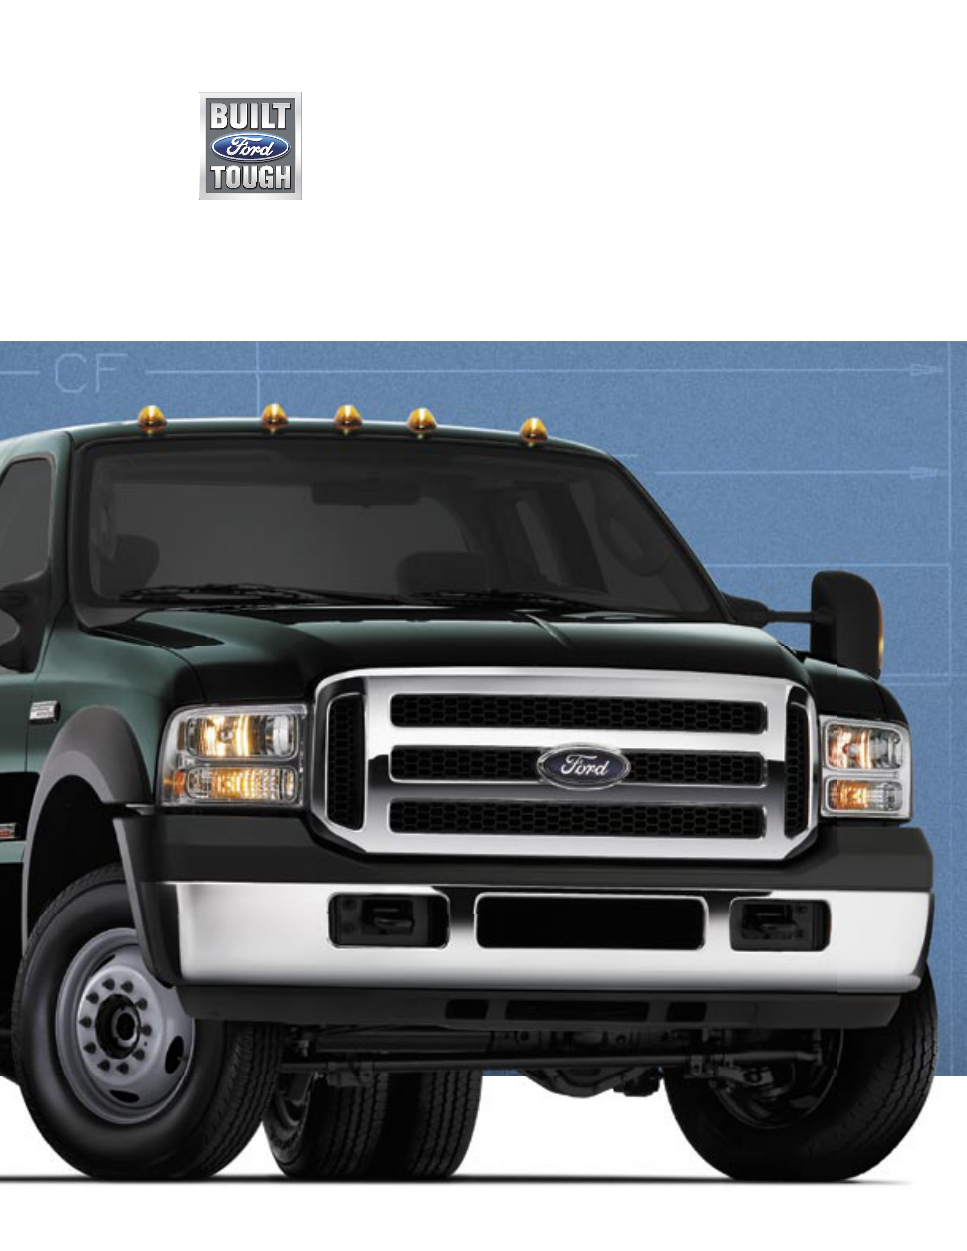 Ford shop manuals free download